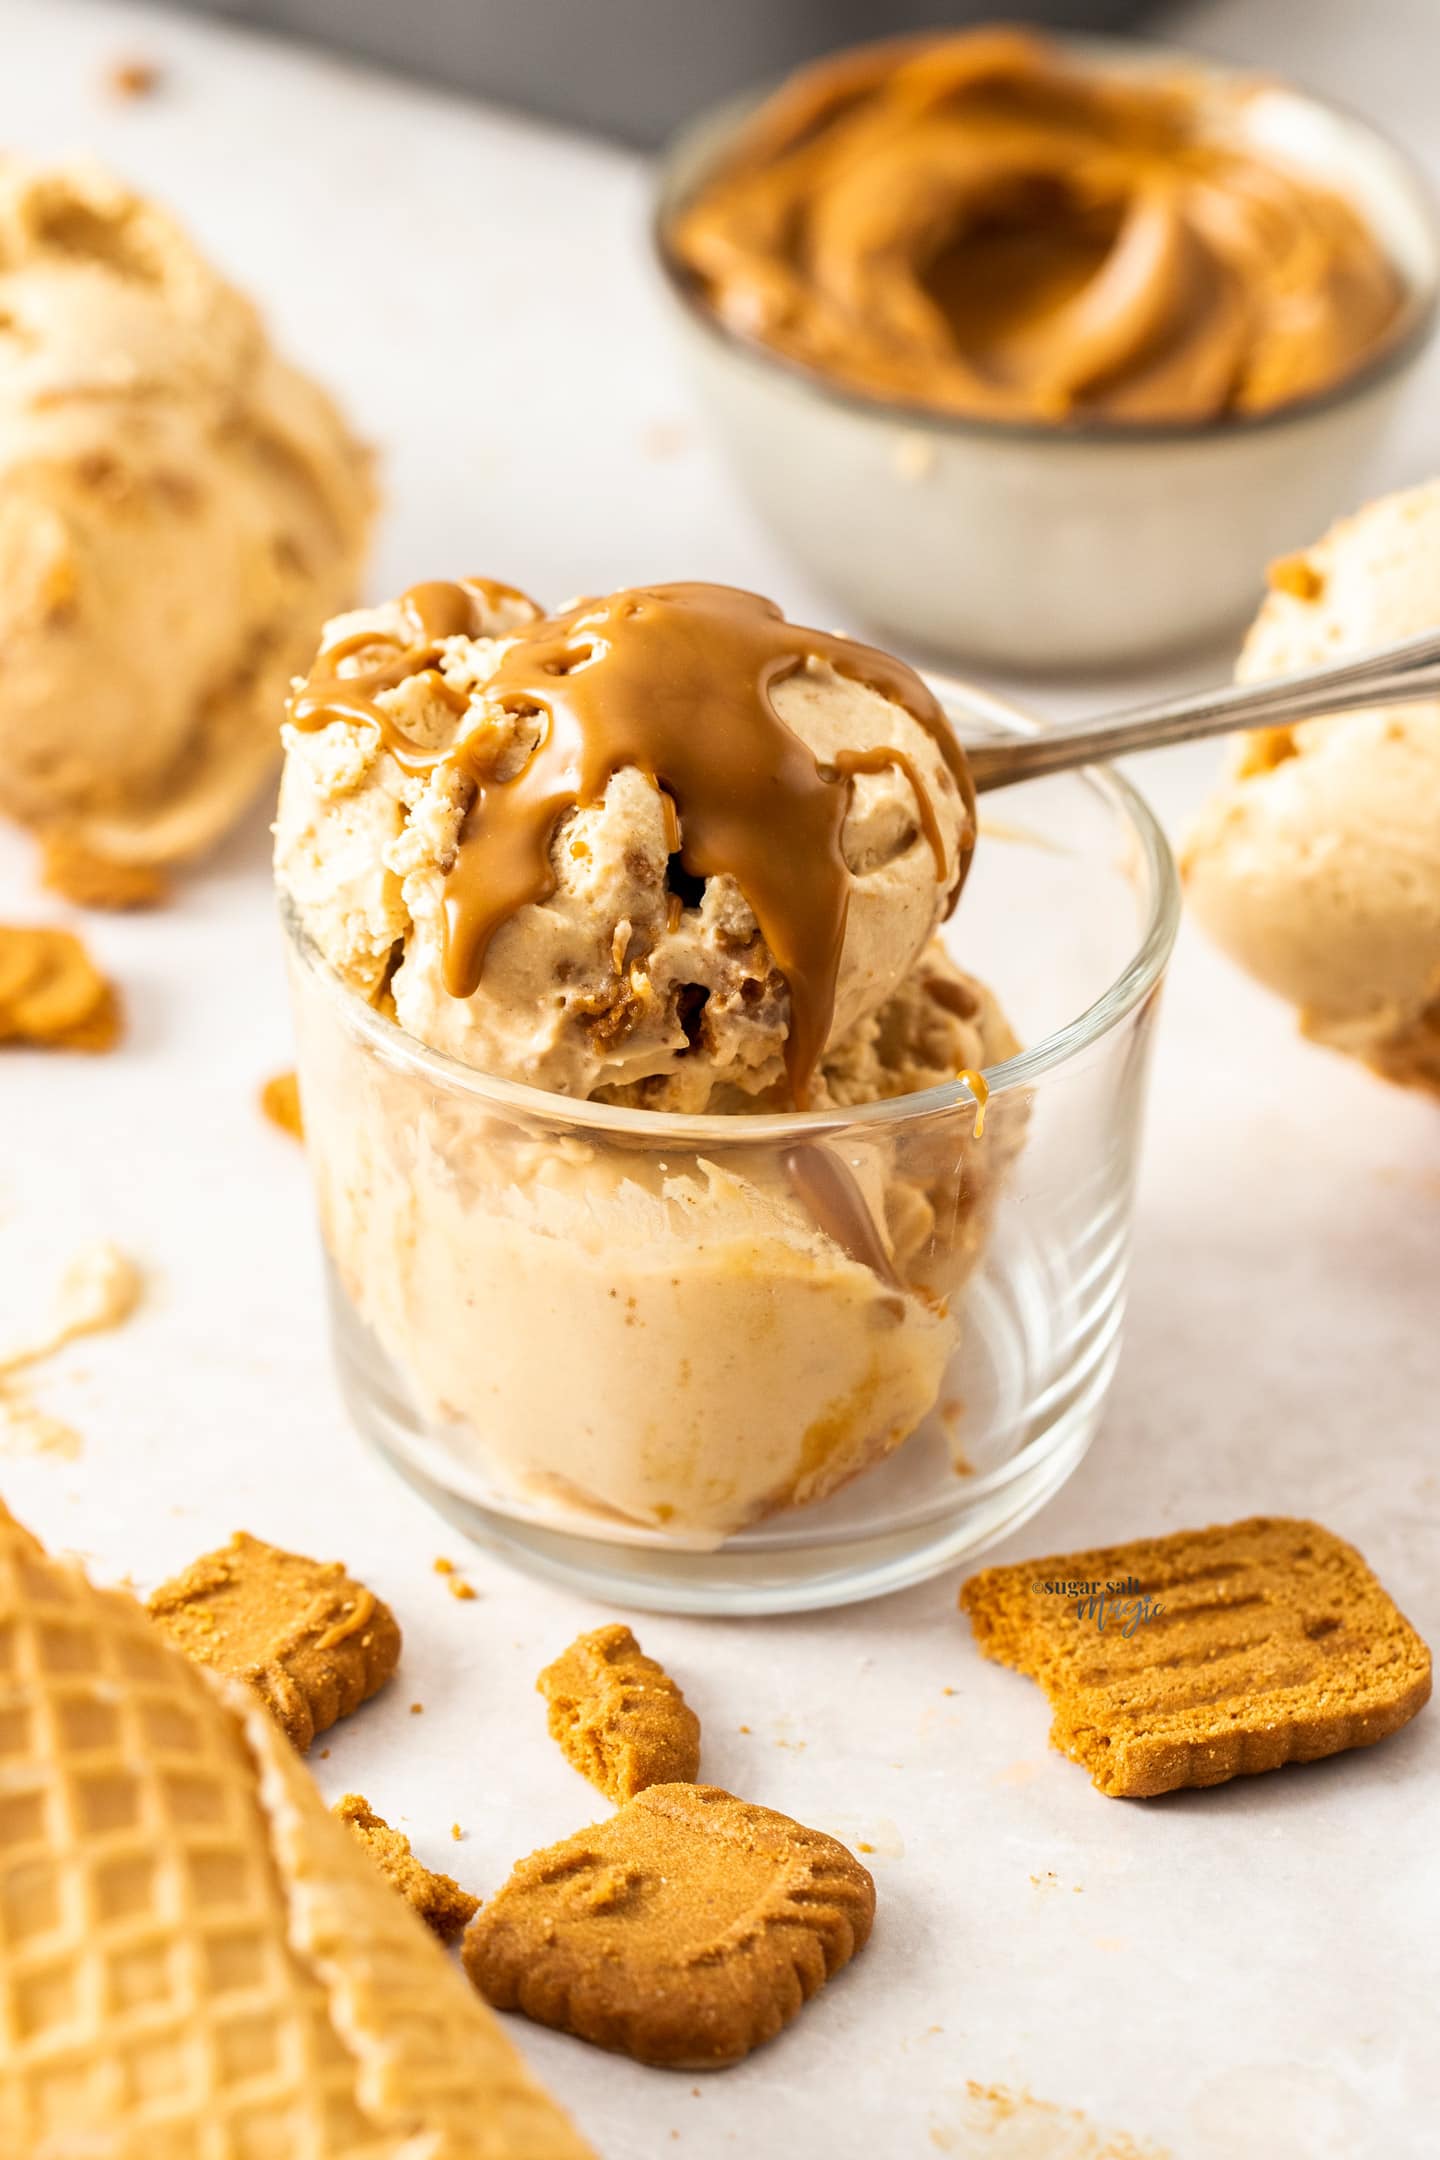 A small glass pot filled with scoops of Biscoff ice cream.